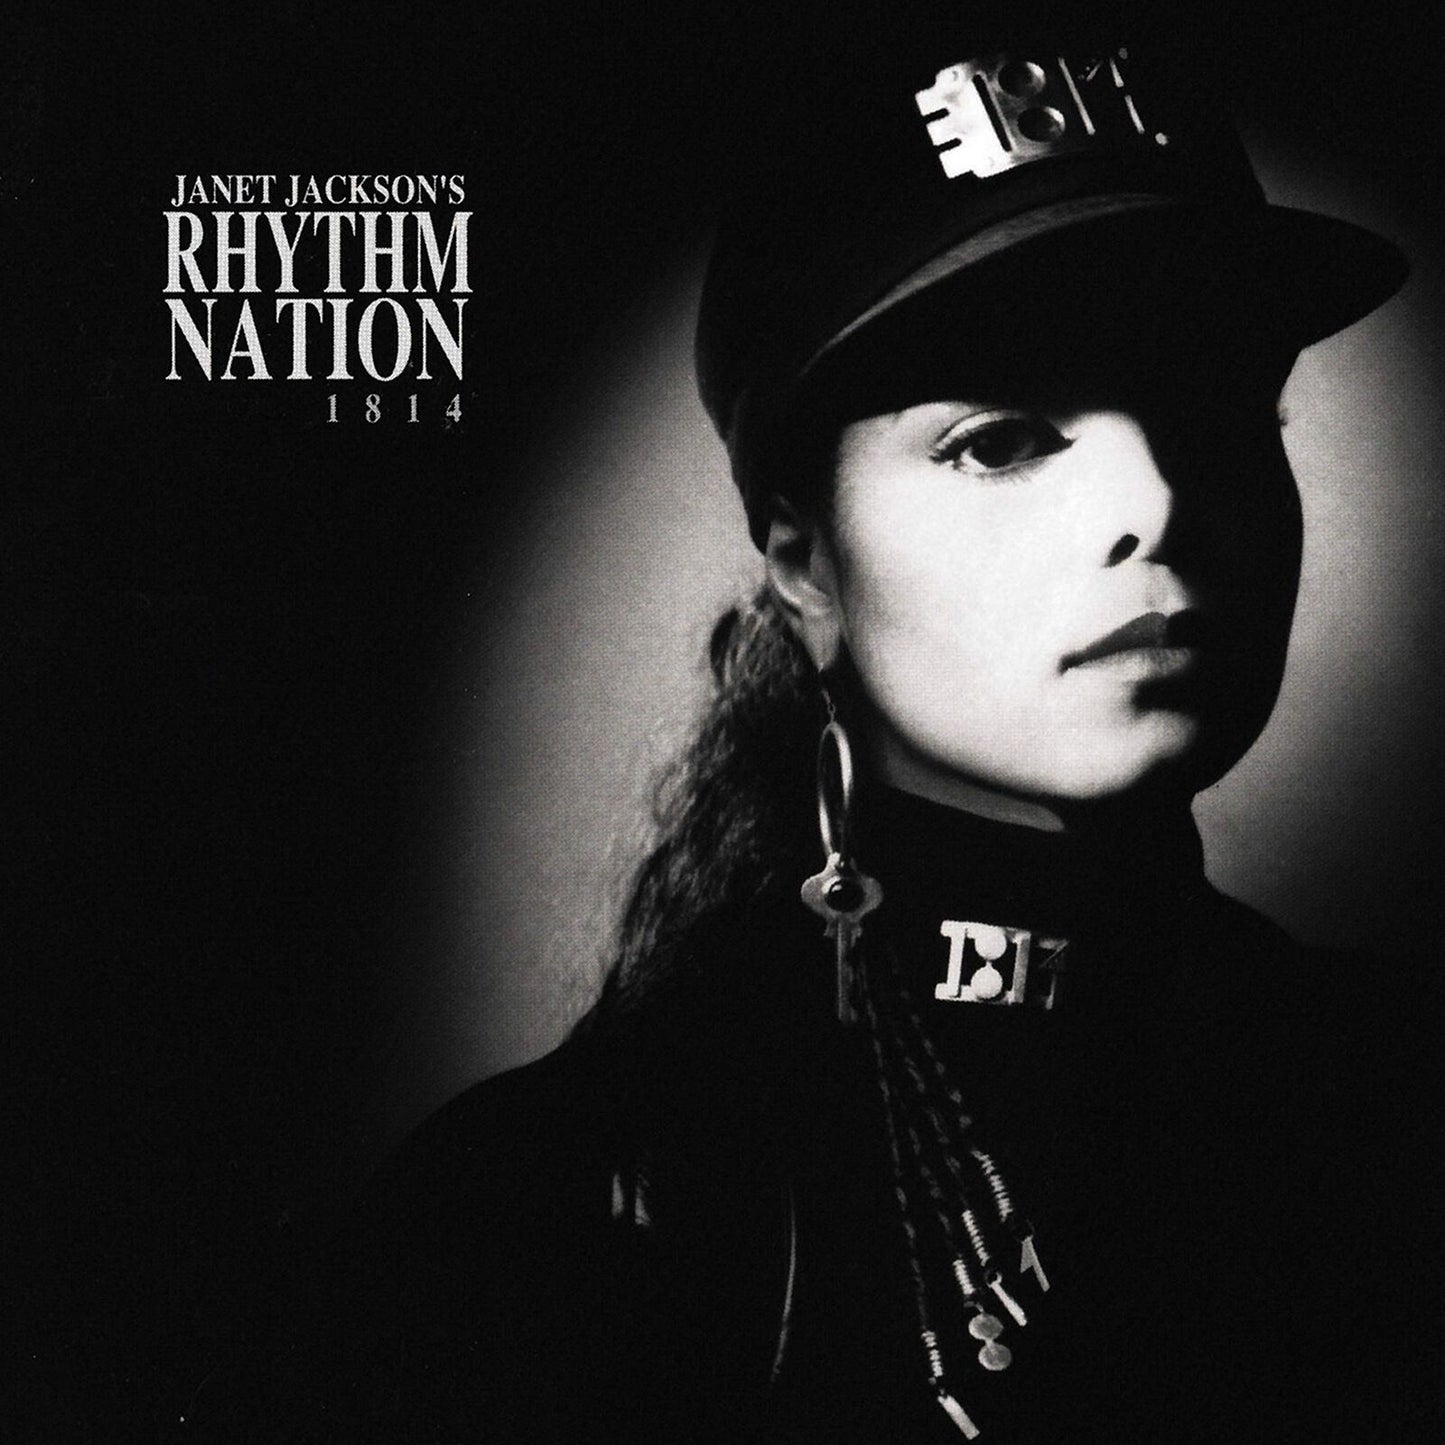 Janet Jackson RHYTHM NATION 1814 New Limited Silver Colored Vinyl Record LP